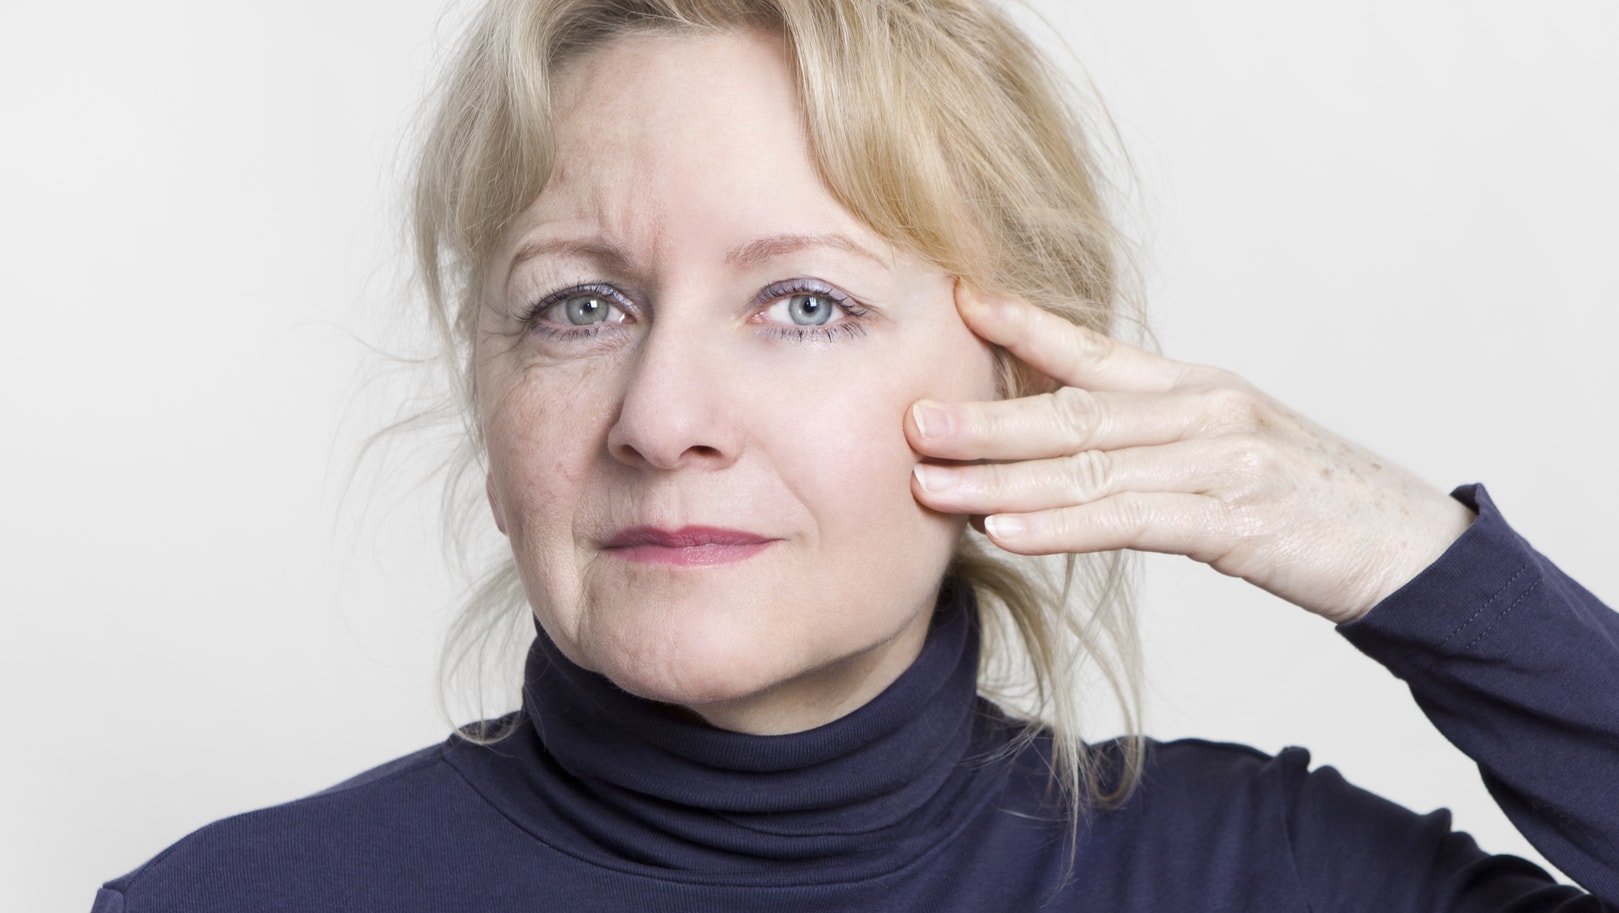 Types of Surgical Facelifts